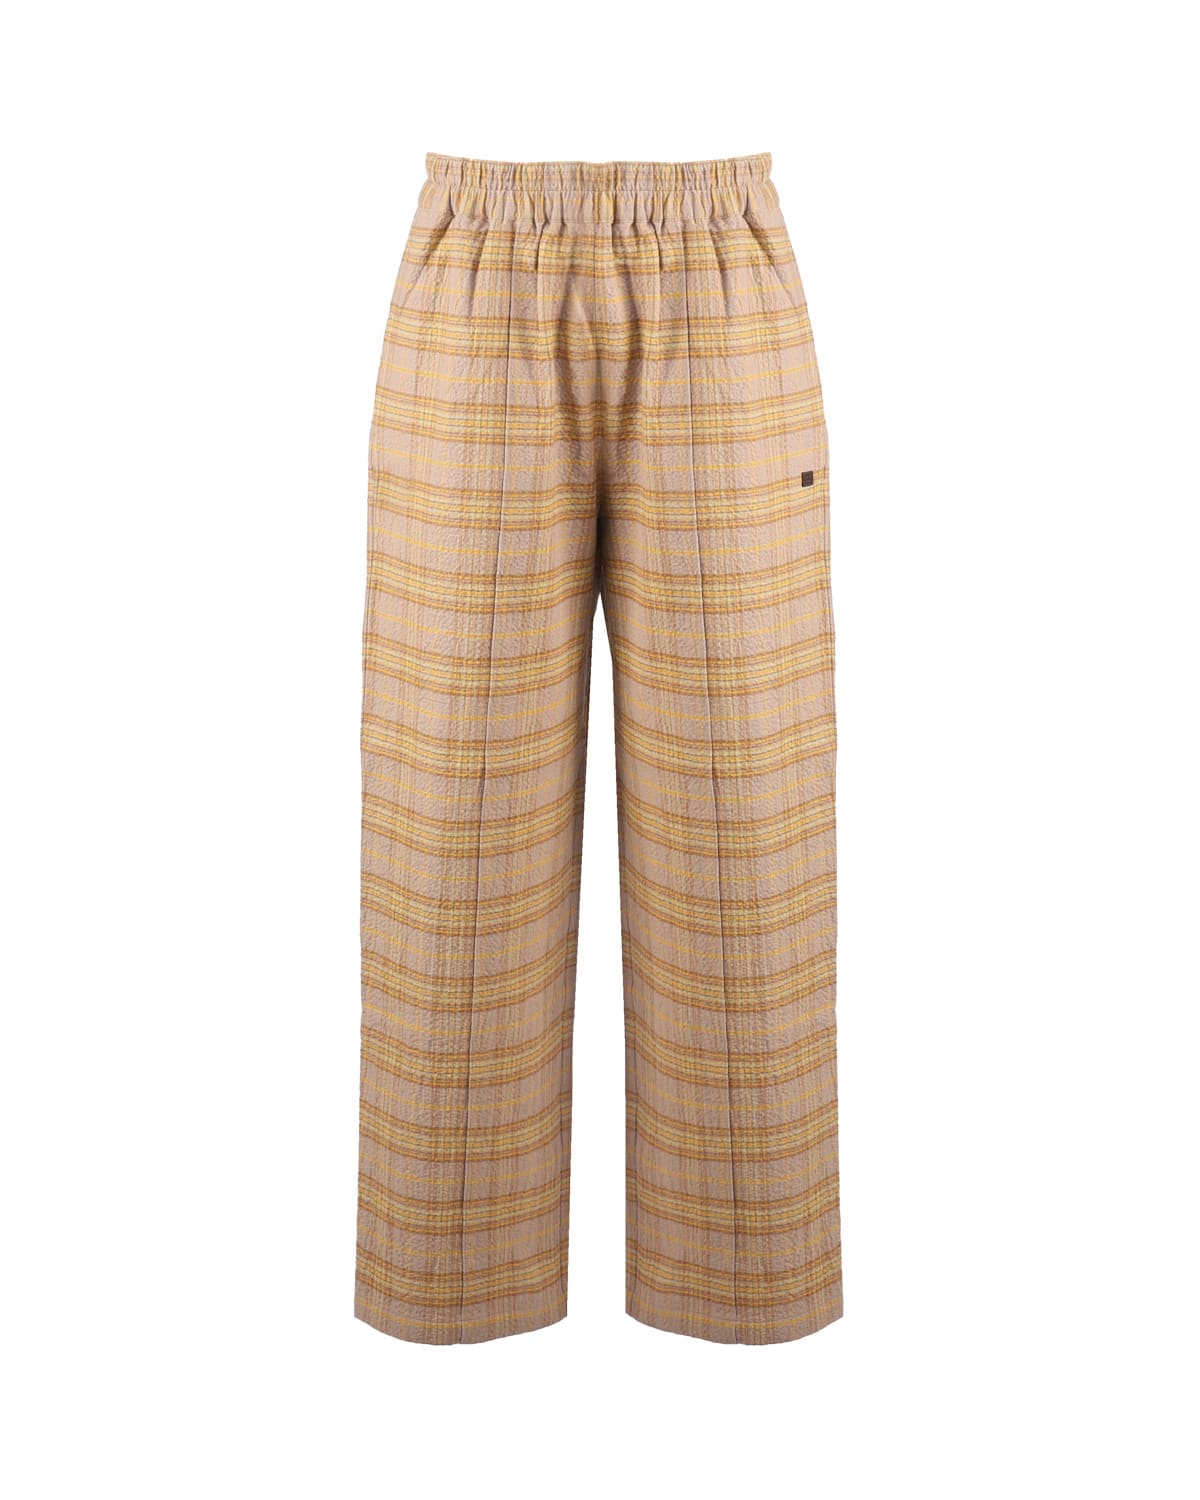 ACNE STUDIOS CHECK PRINTED TROUSERS